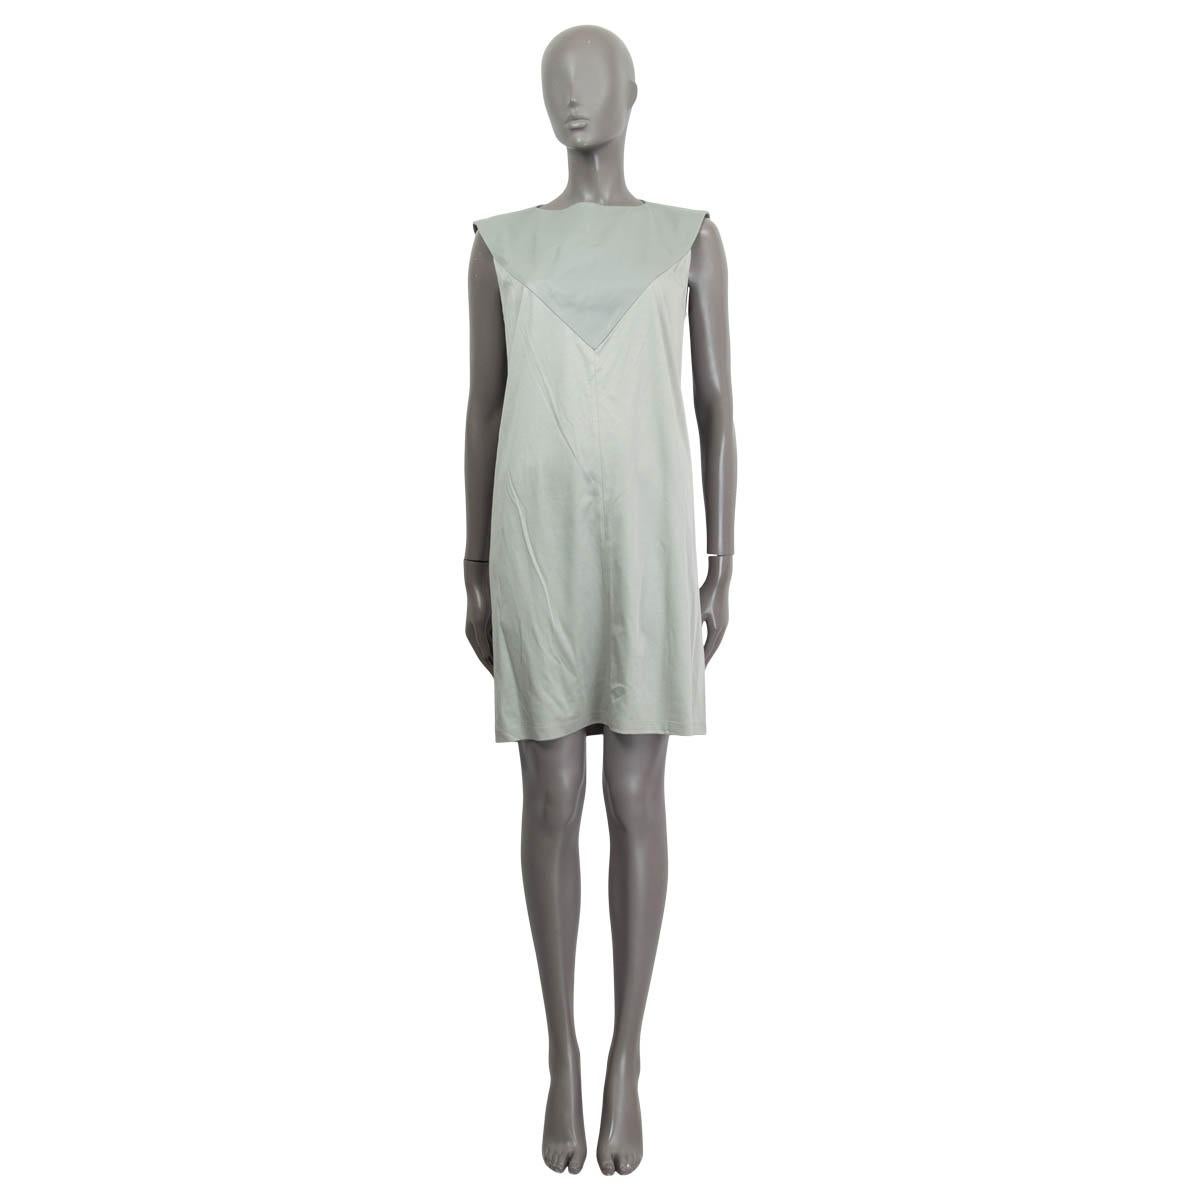 100% authentic Balenciaga sleeveless dress in mint cotton (80%) and lamb leather (20%). Opens with a concealed zipper and a hook on the back. Unlined. Has been worn once and is in virtually new condition. 

Measurements
Tag Size	40
Size	M
Bust	94cm